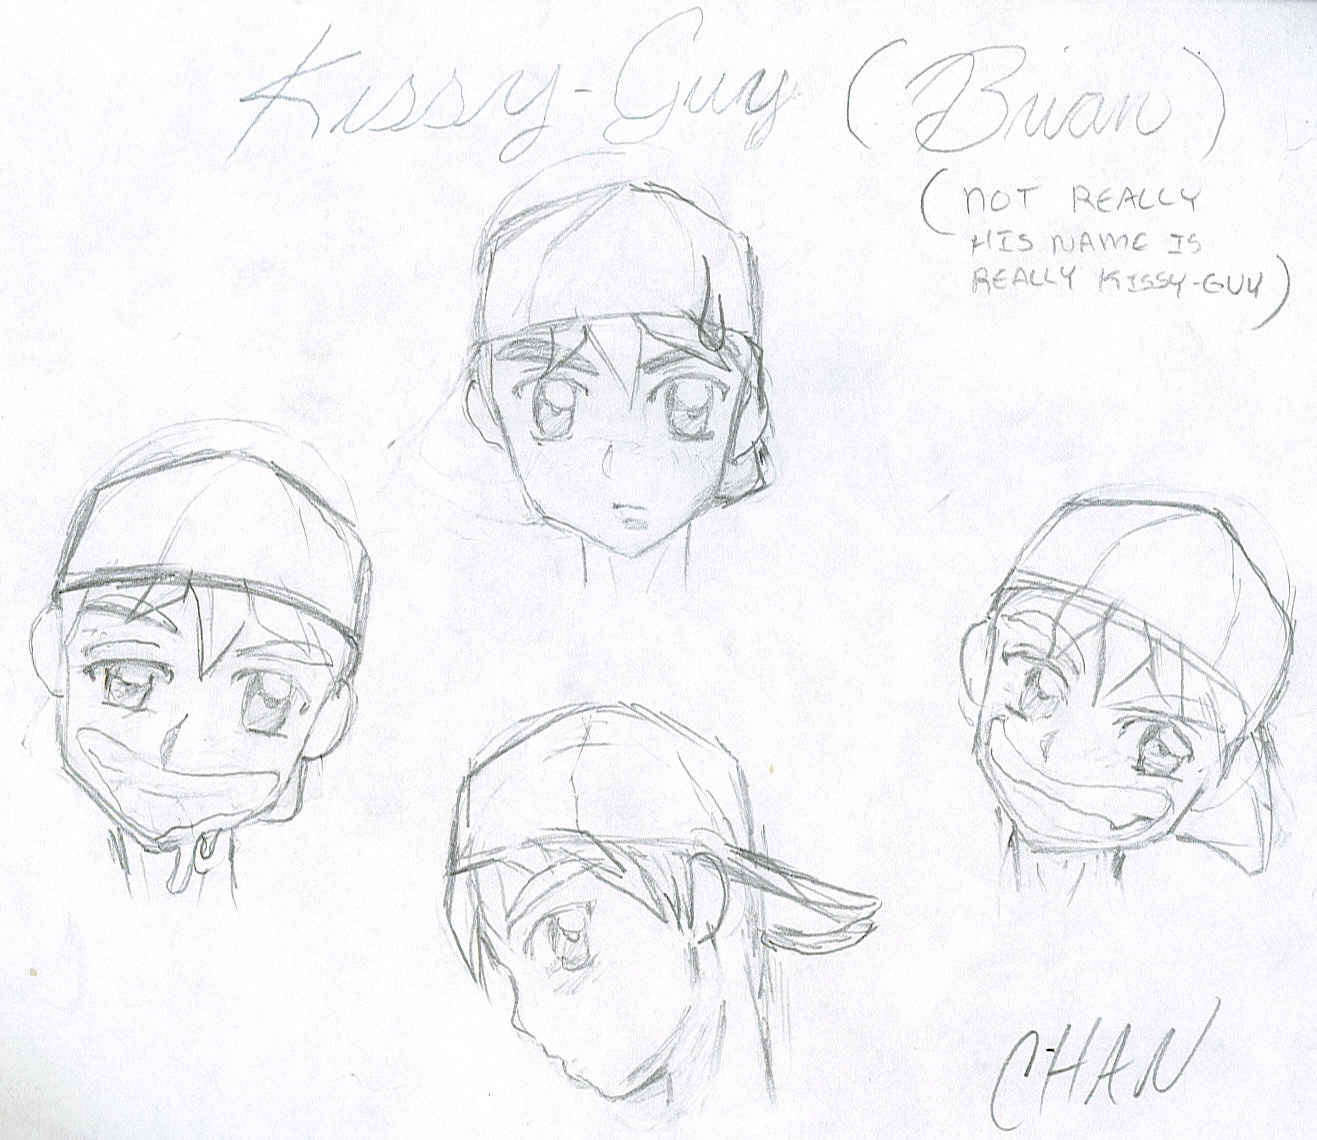 Brian's Expressions by Surj_the_Dark_Kaobi